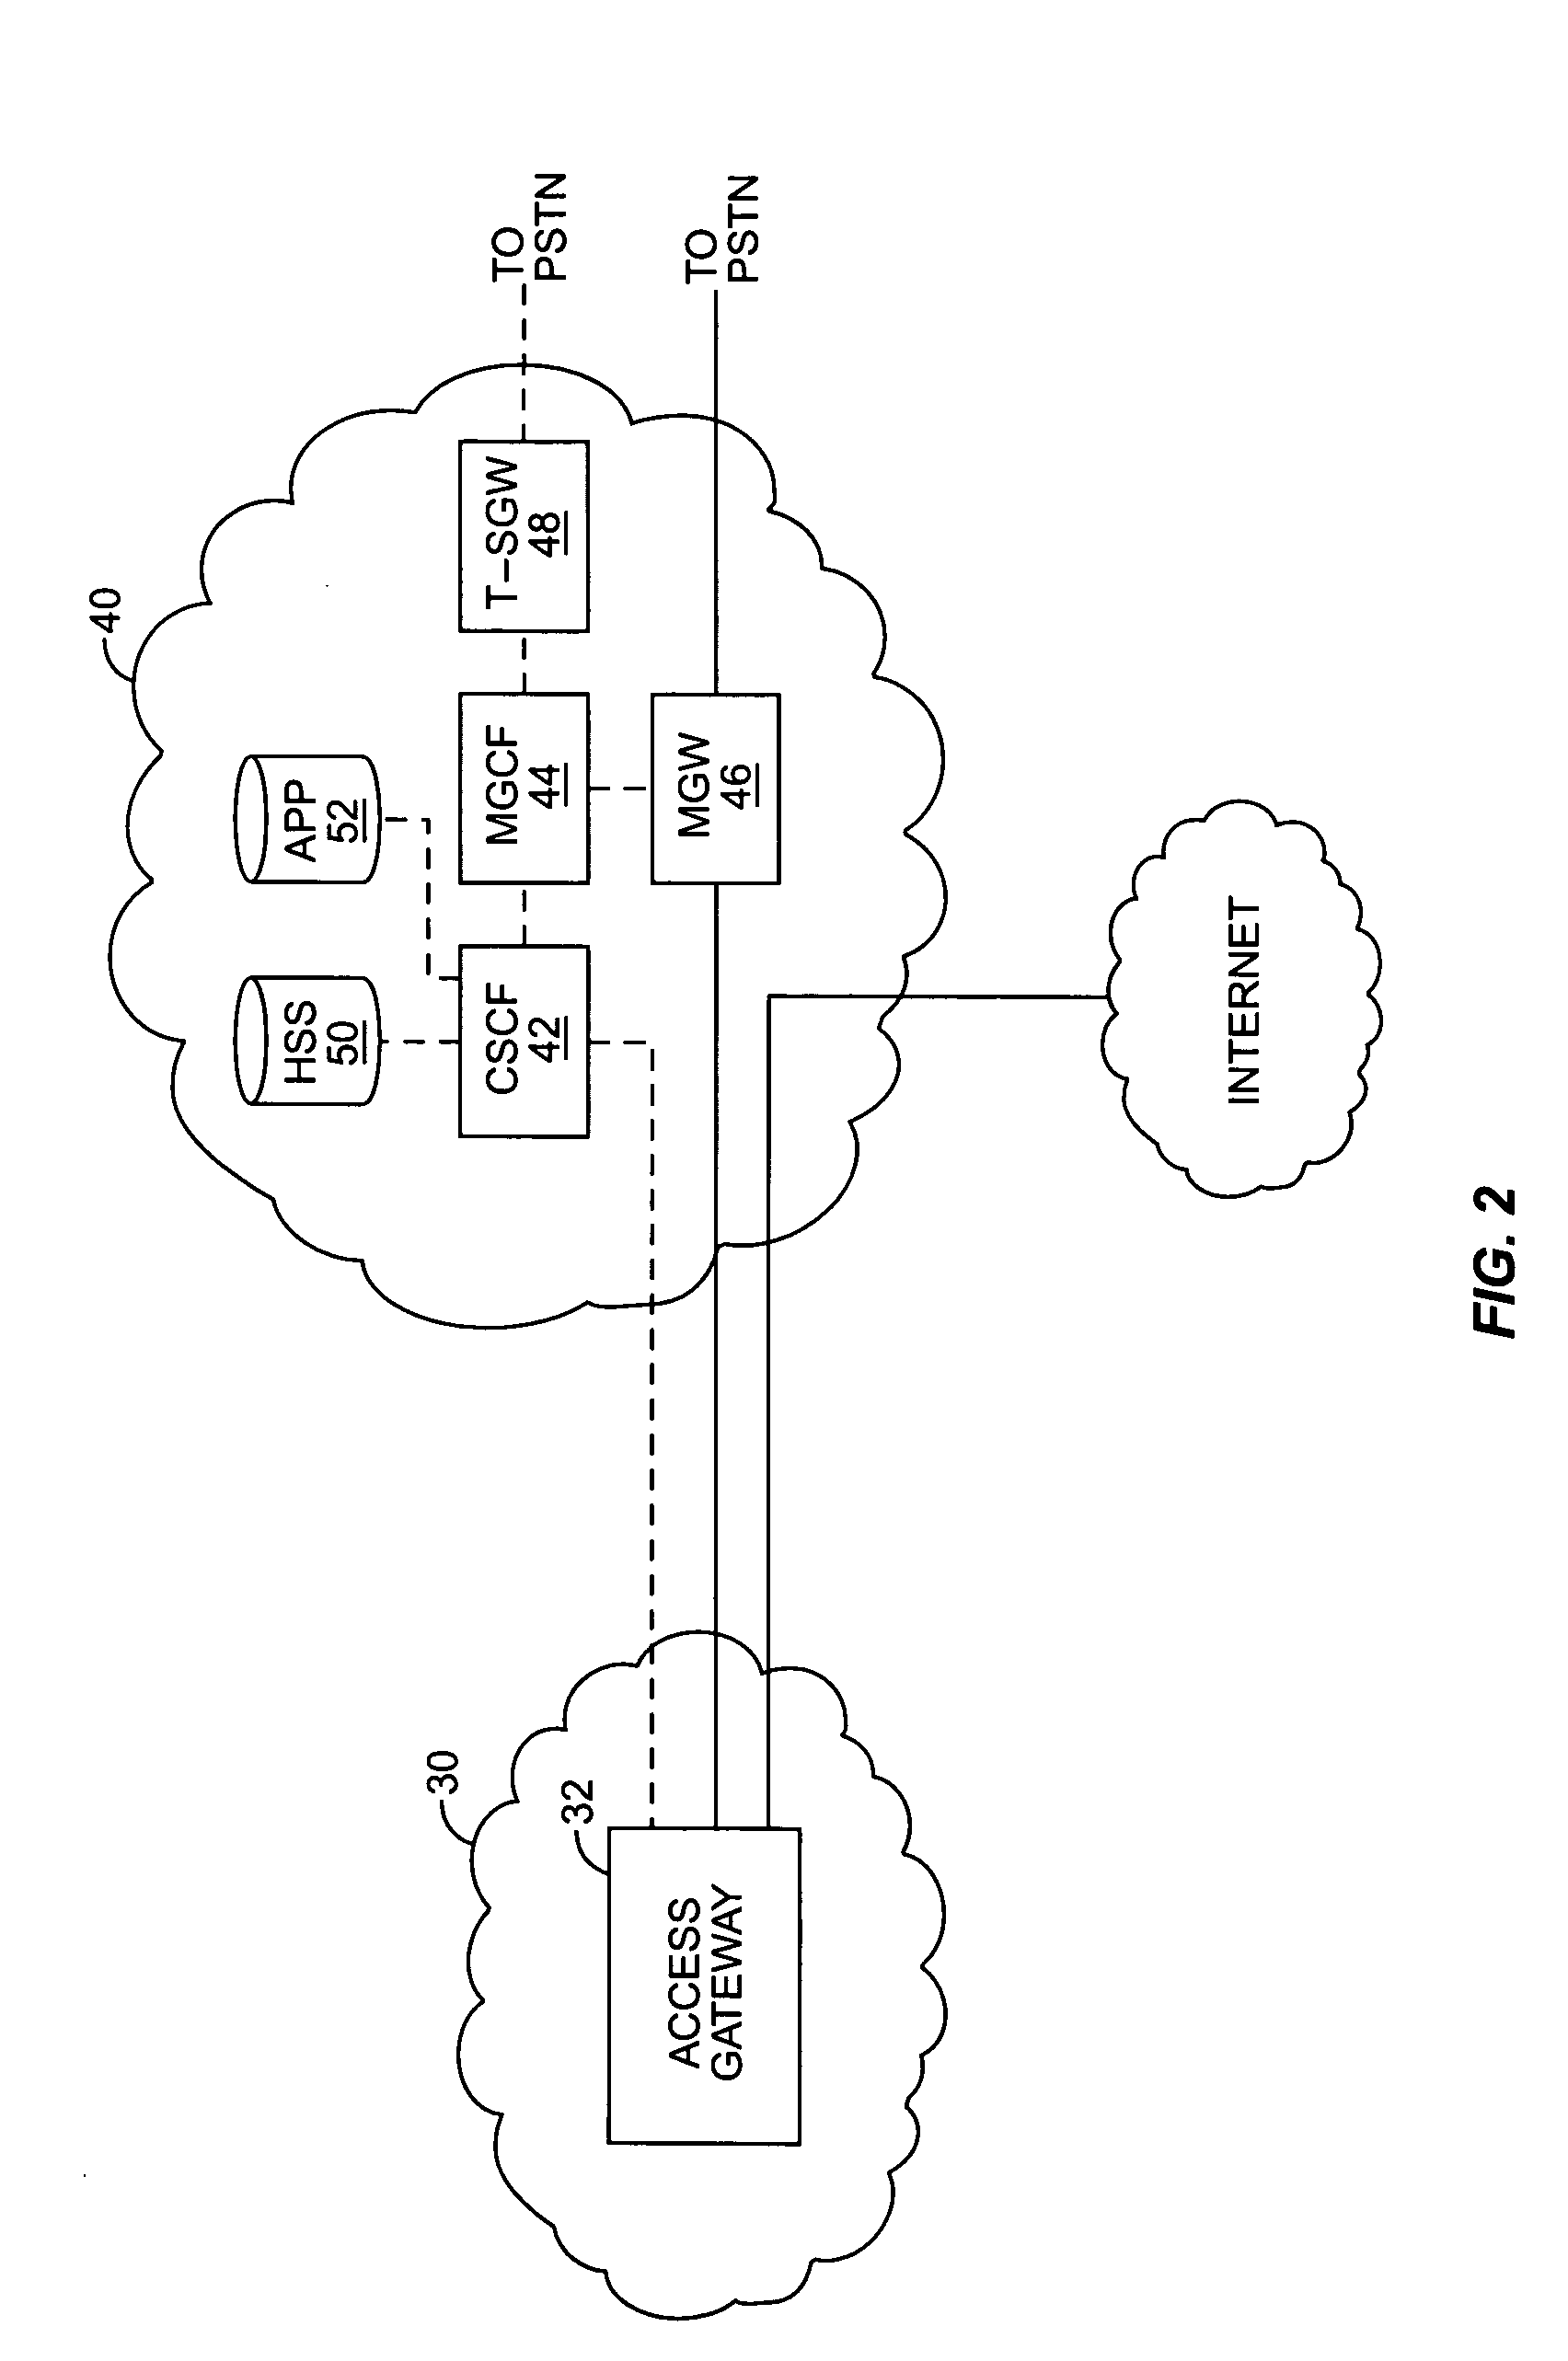 Method to facilitate distribution of group identifications for push-to-talk groups